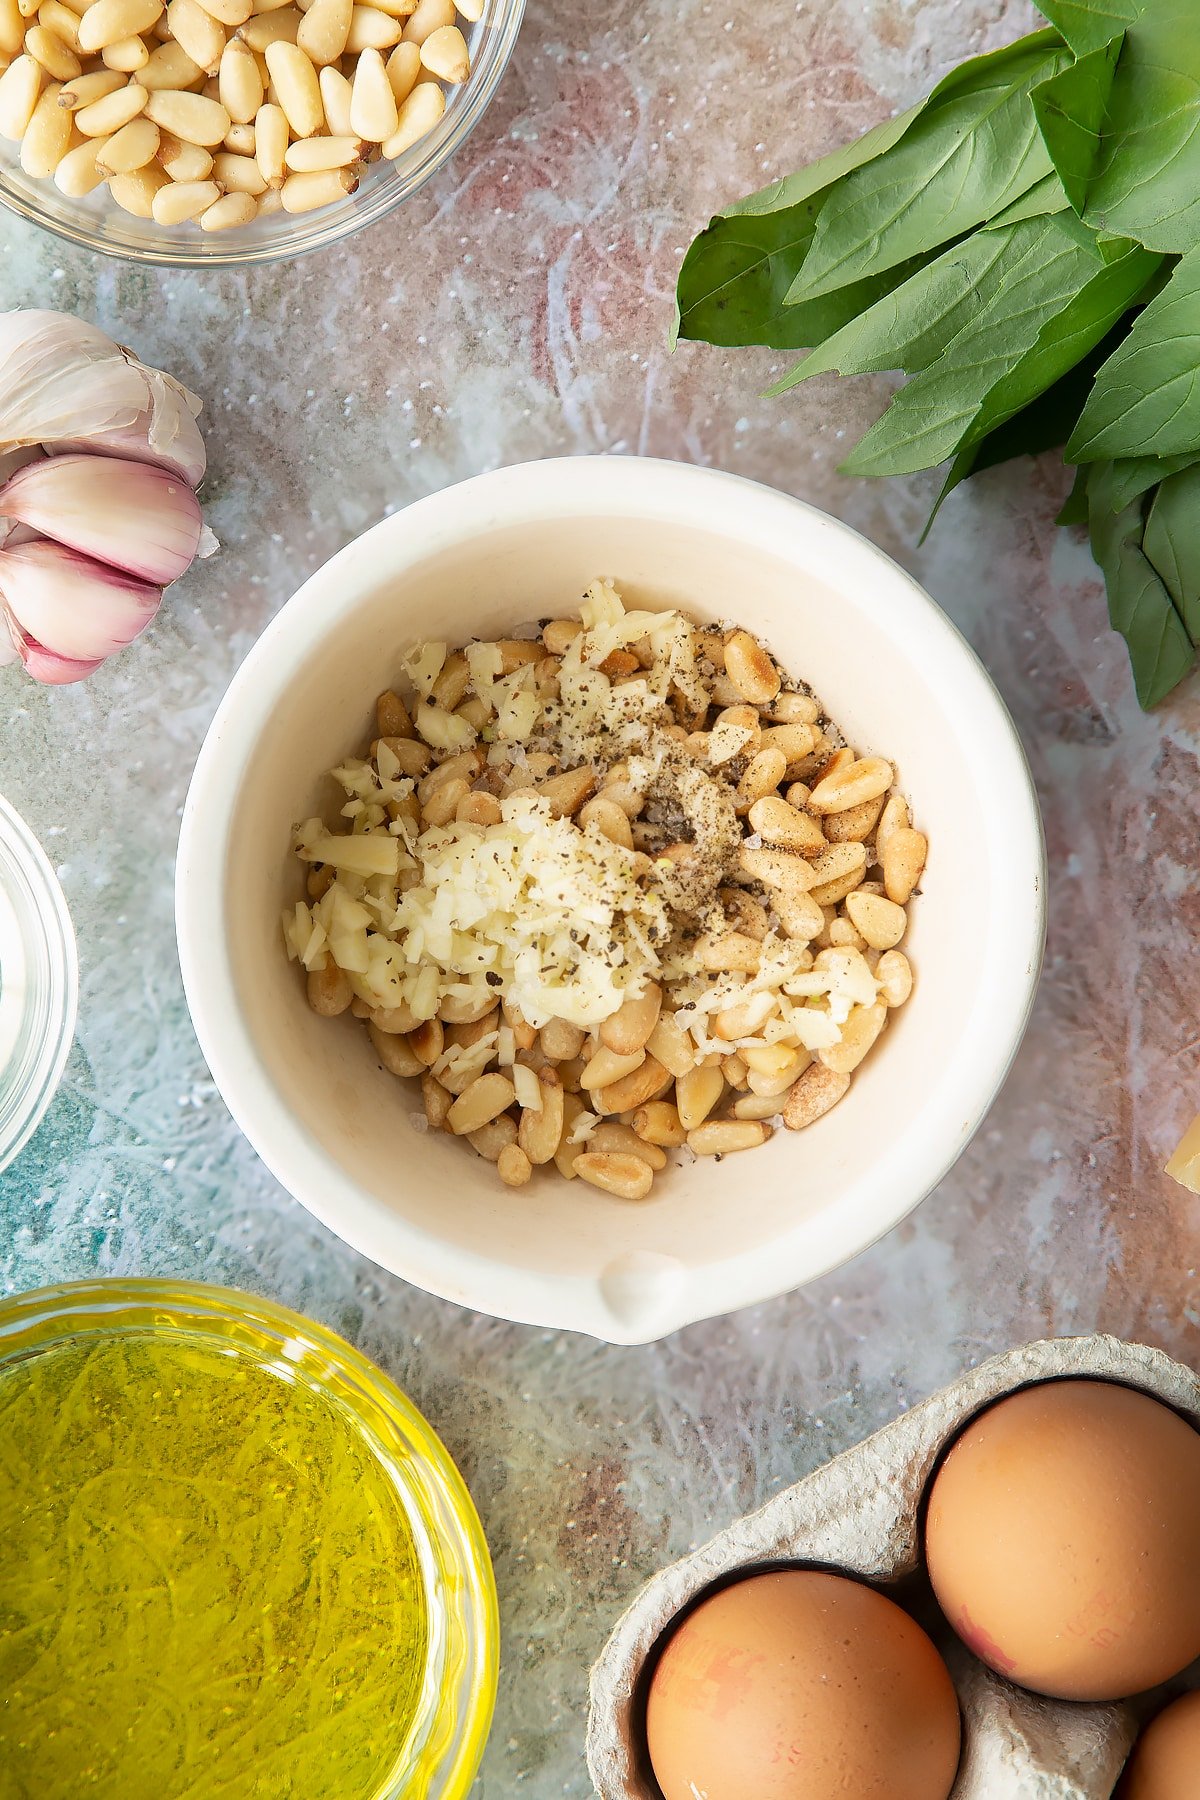 Toasted pine nuts, garlic, salt and pepper in a small mortar. Ingredients to make pesto mayo surround the mortar.